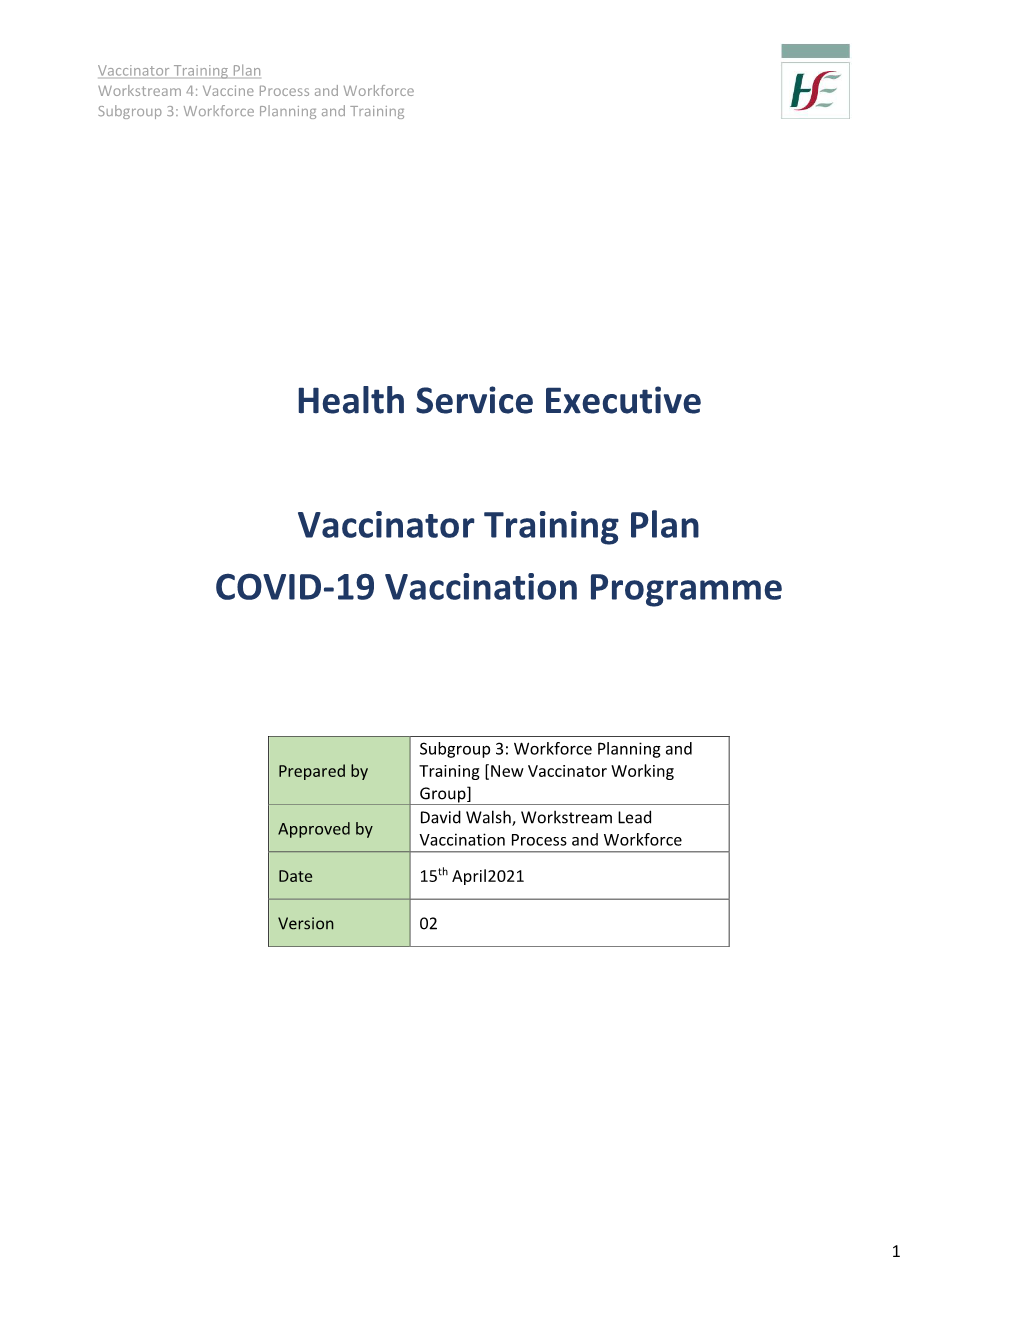 Vaccinator Training Plan Workstream 4: Vaccine Process and Workforce Subgroup 3: Workforce Planning and Training